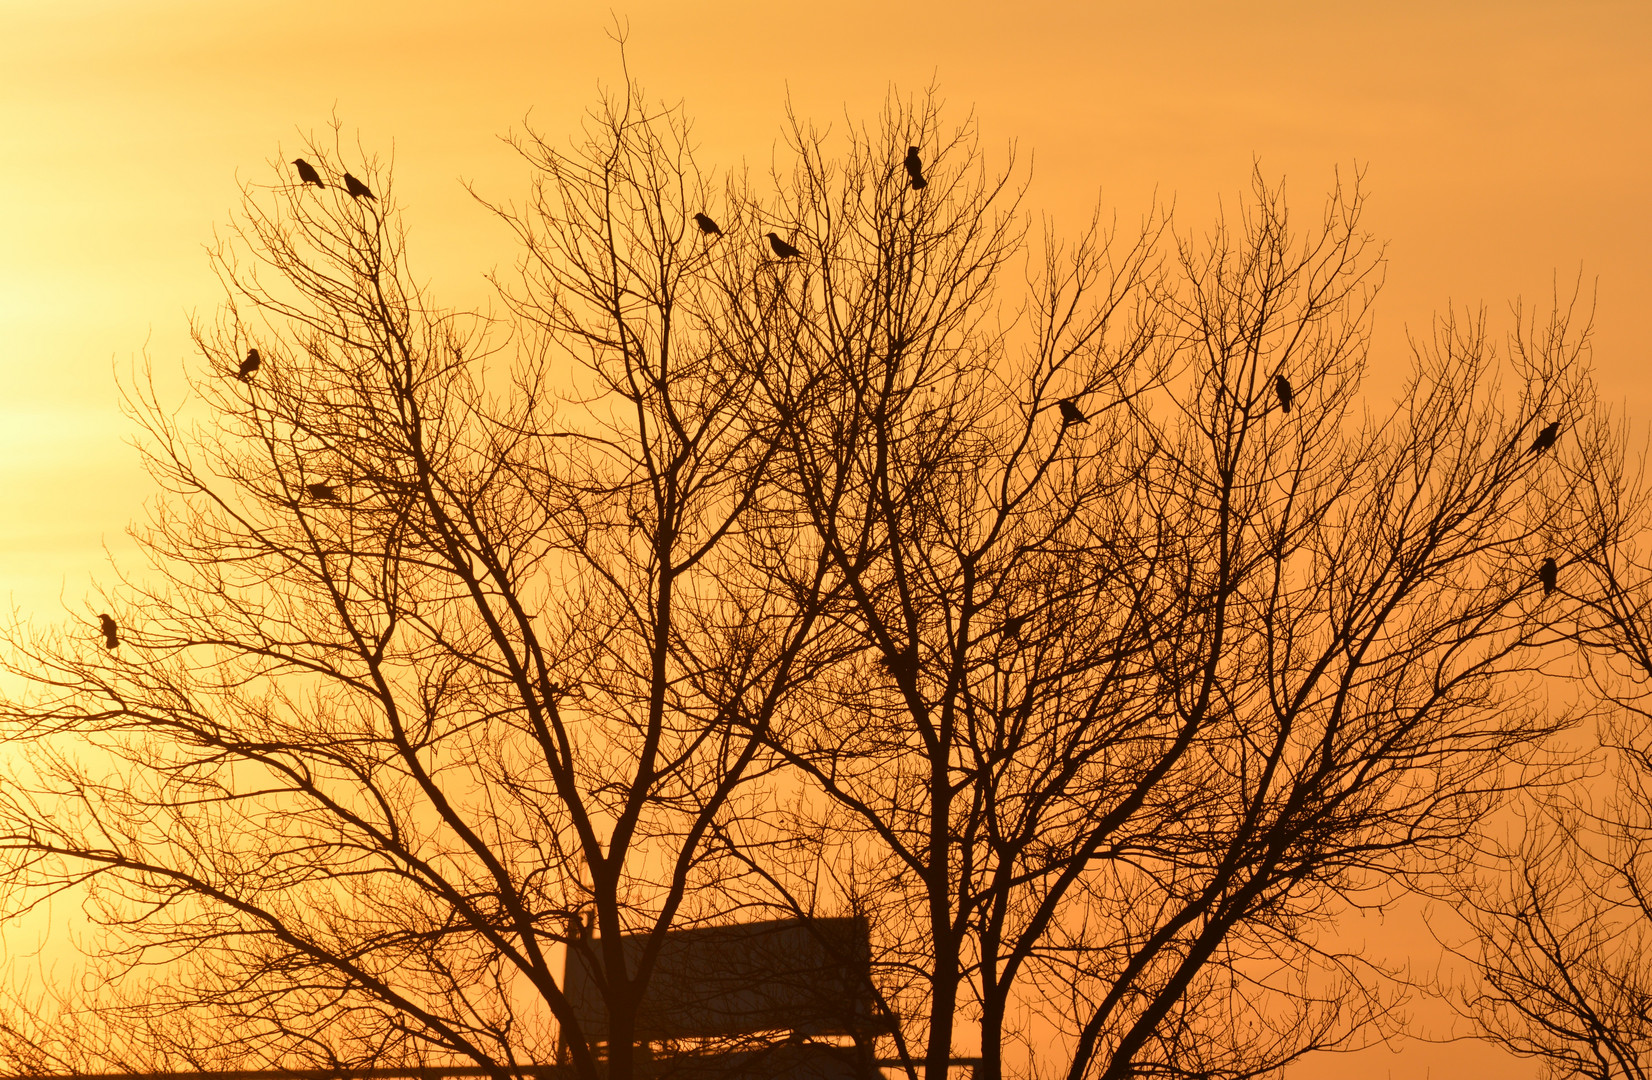 Crows settling at sunset 